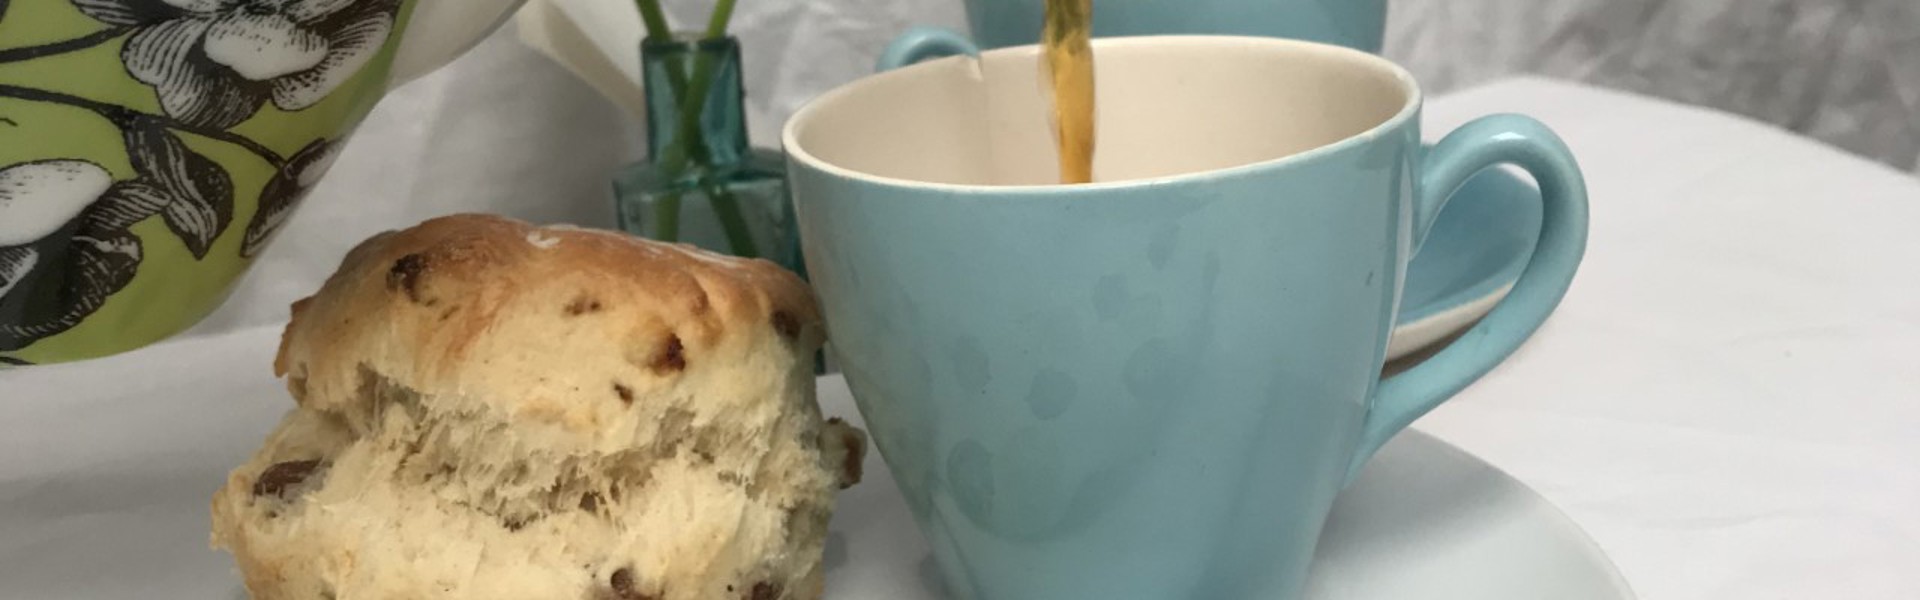  Hand printed green white and black polka dot napkin underneath a teacup and scone 